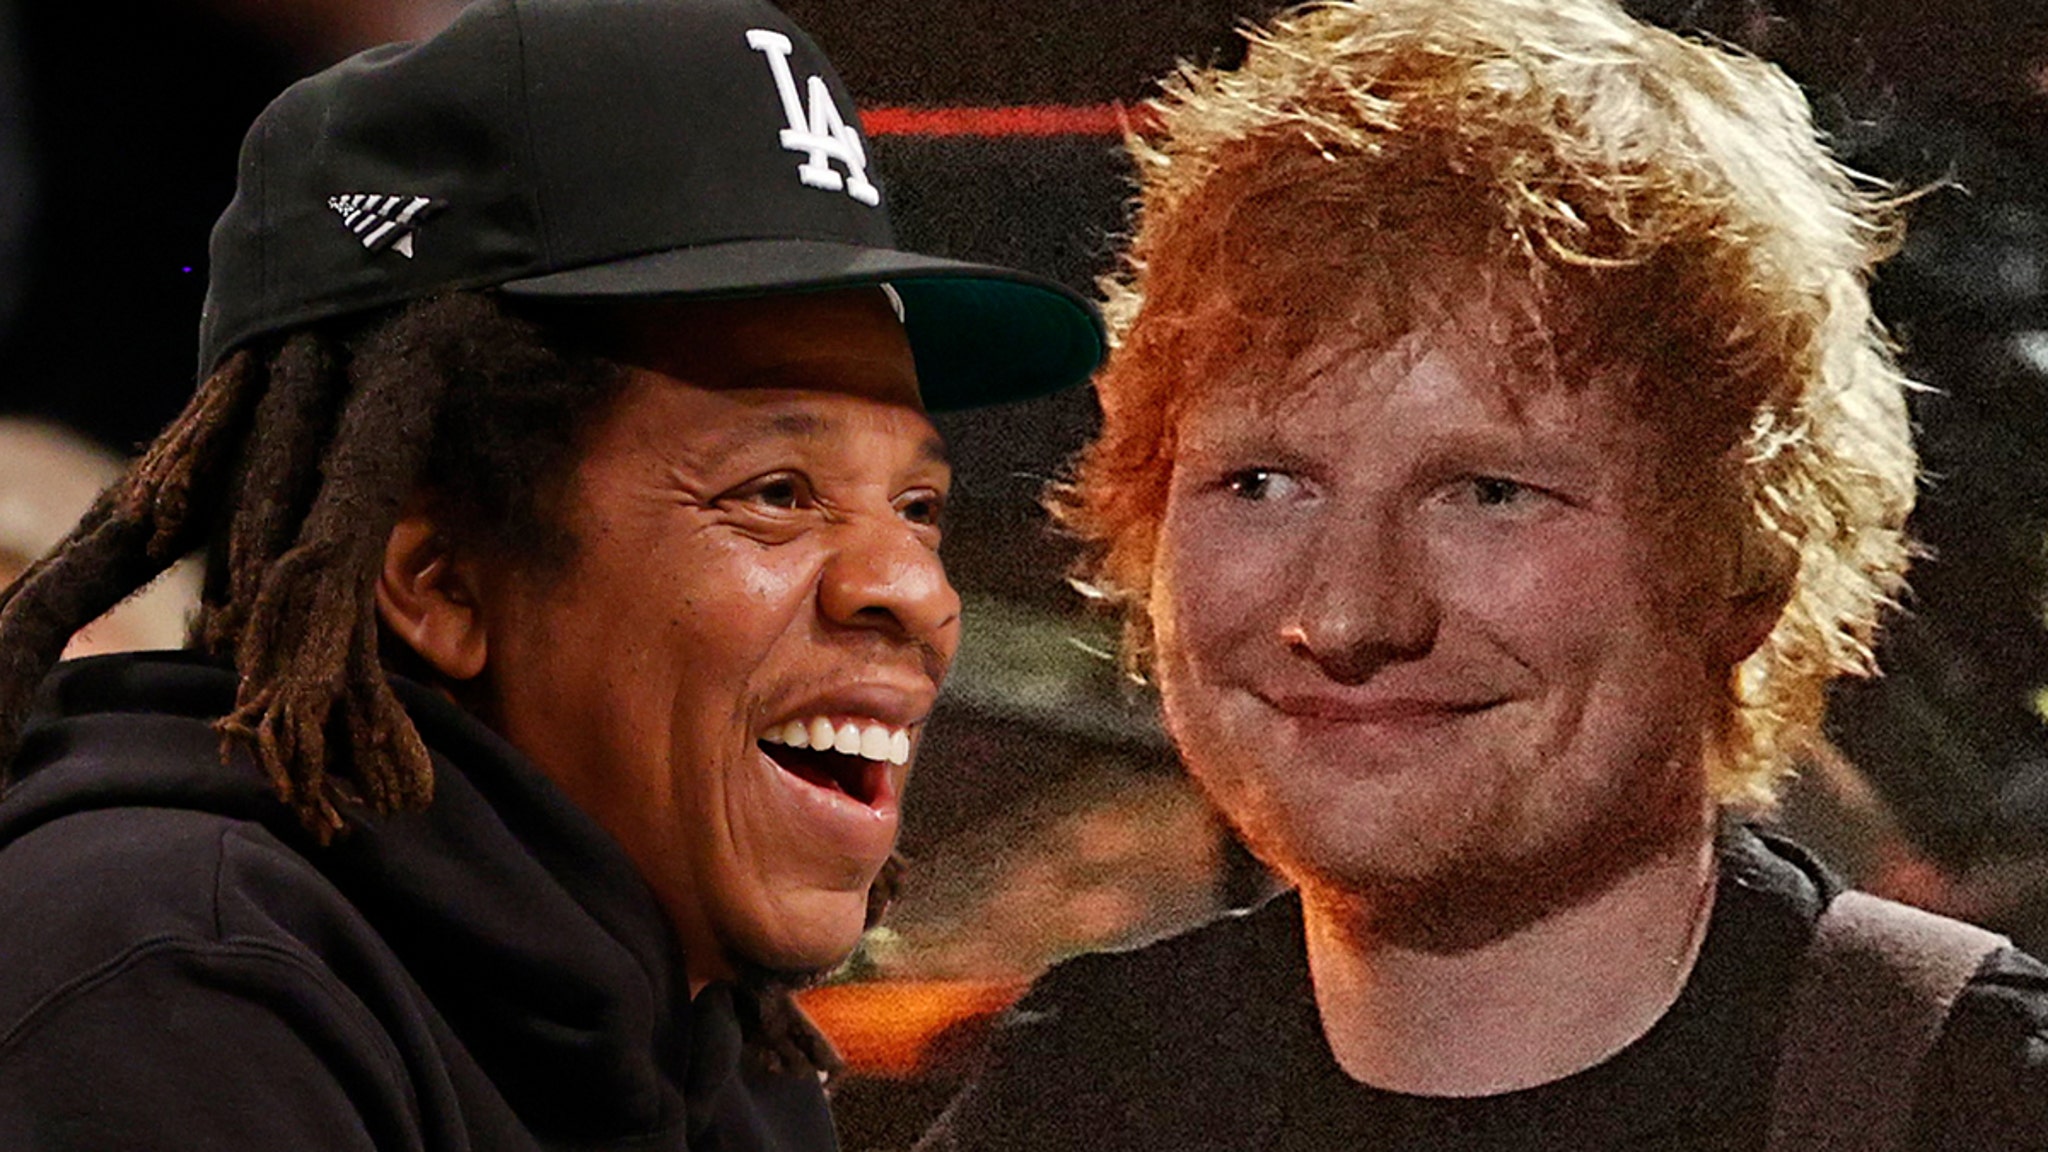 Jay-Z rejects Ed Sheeran’s ‘Shape of You’ feature, saying the song doesn’t need a rap.